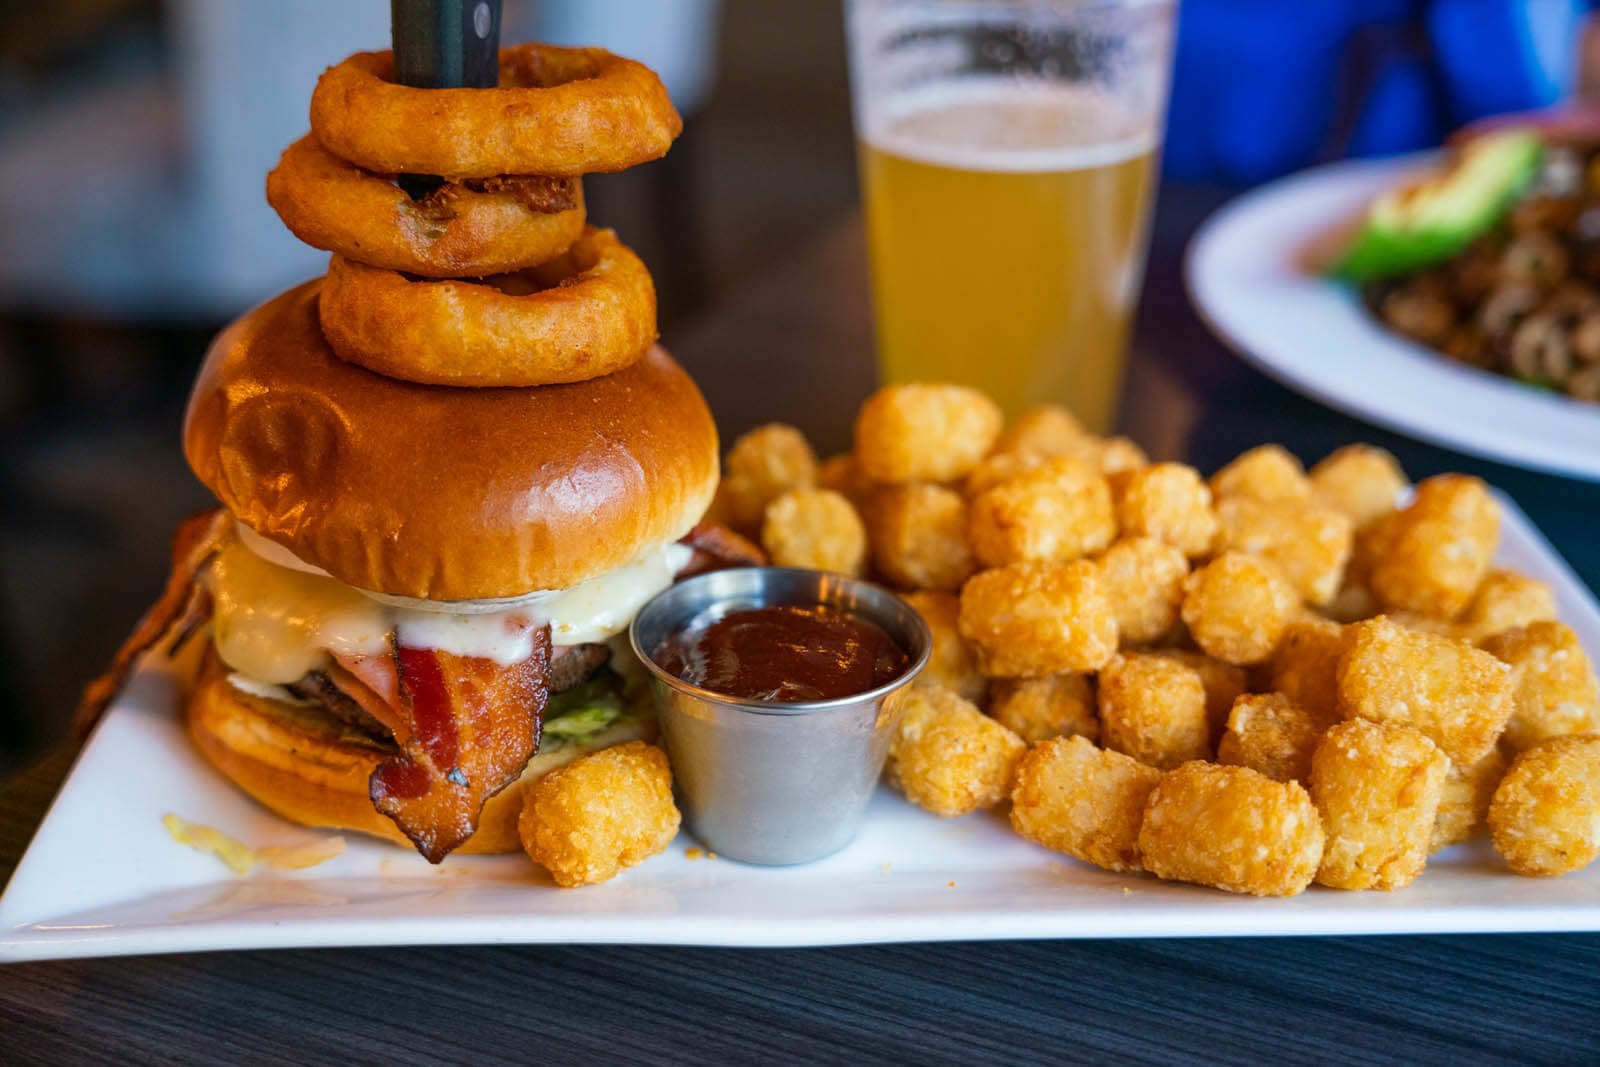 burger and tots at Whistlin' Jack's Outpost and Lodge in Yakima Valley Washington